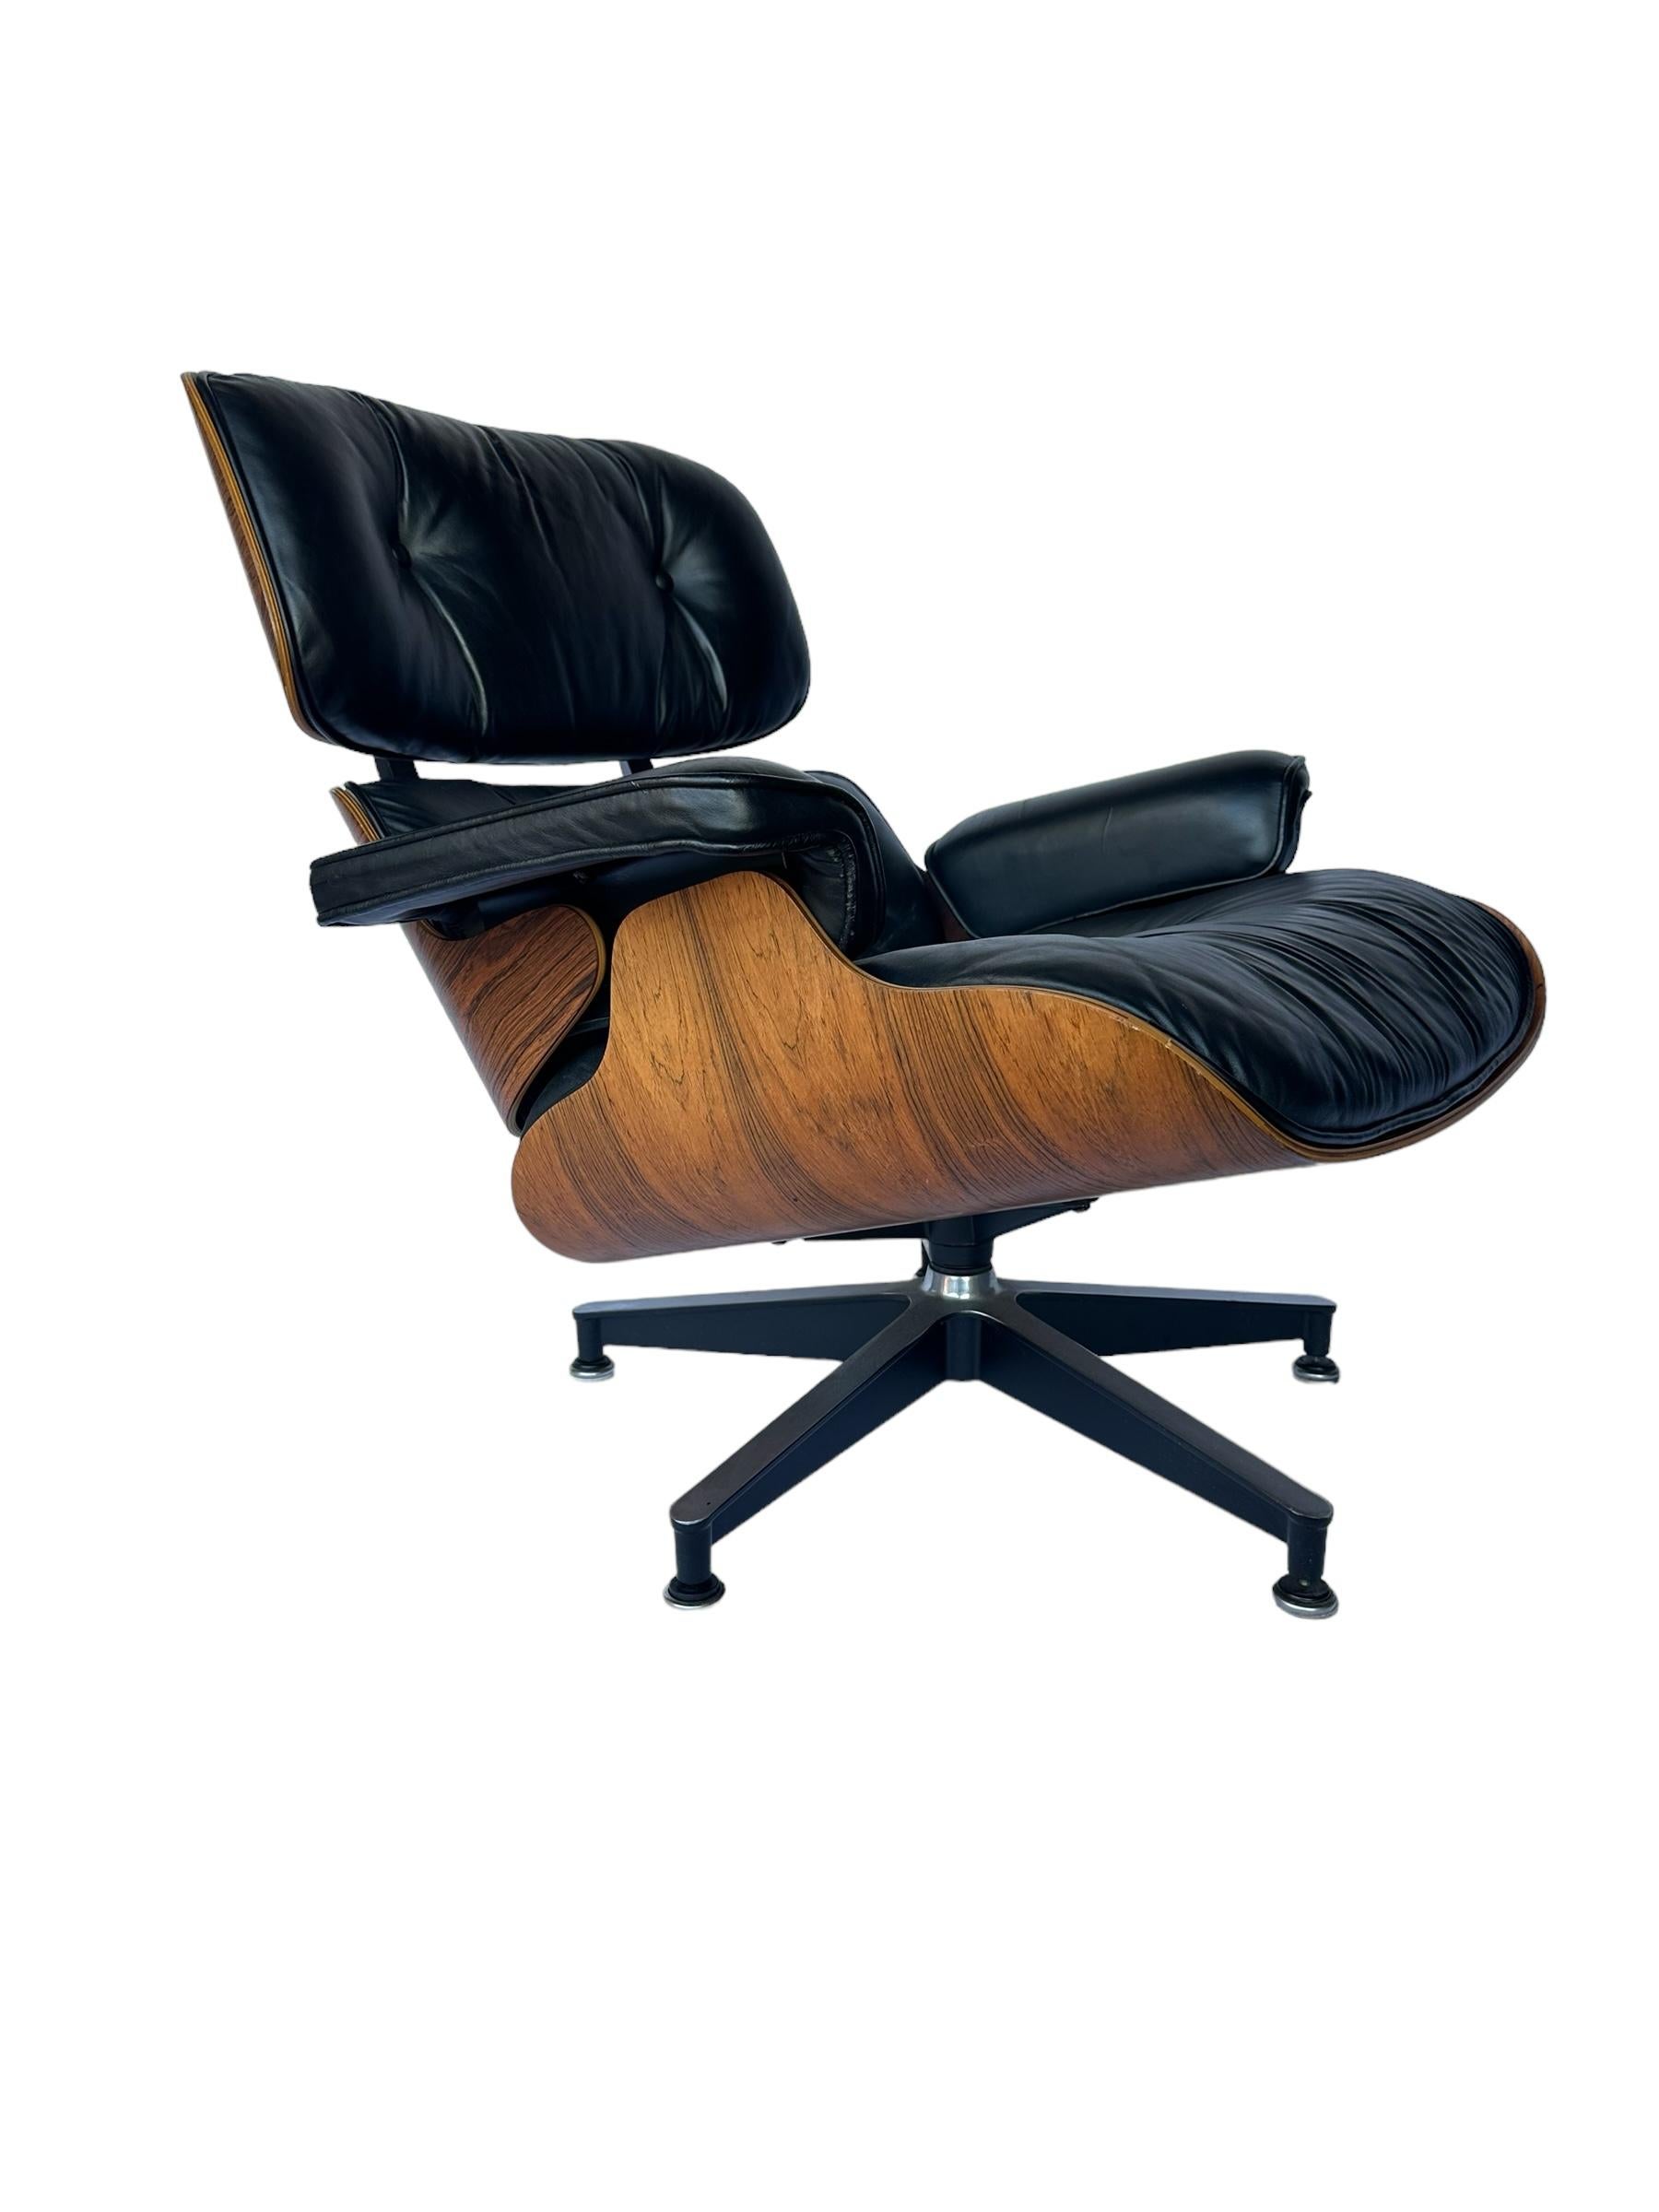 Restored 1970s Rosewood Eames Lounge Chair and Ottoman by Herman Miller For Sale 6